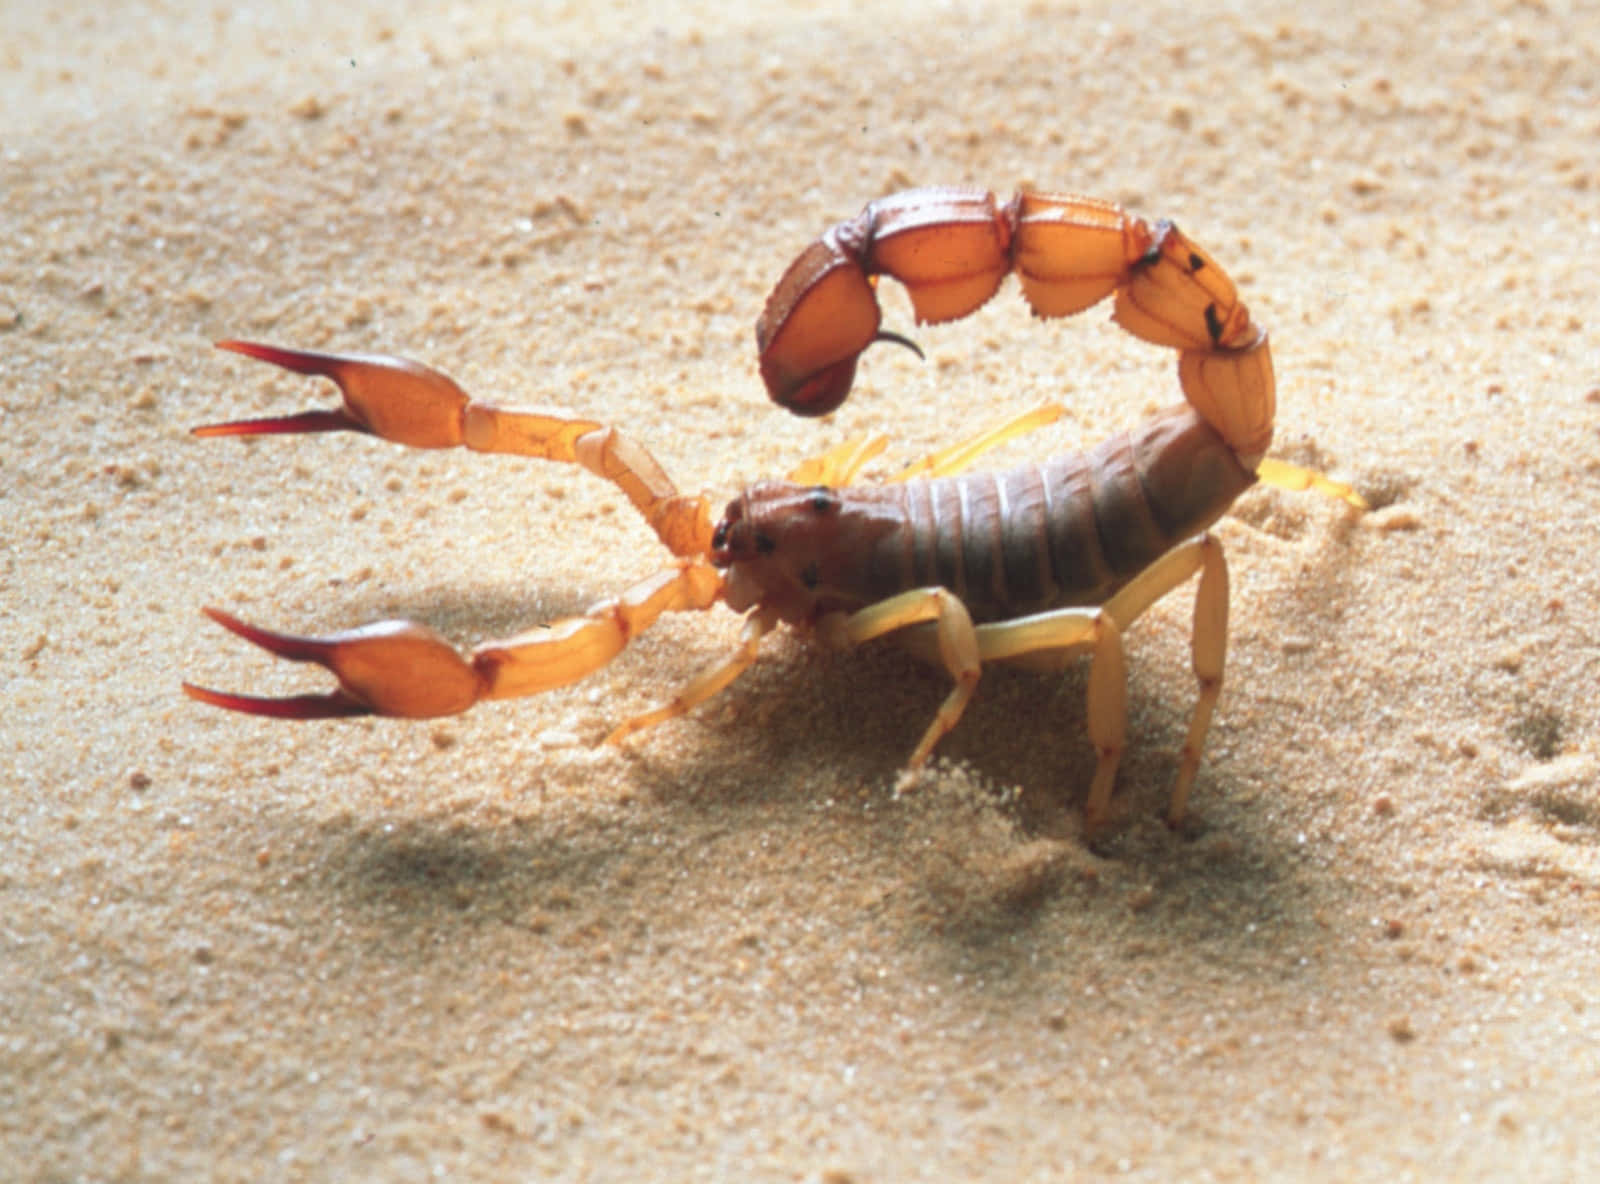 A Scorpion Is Walking On The Sand